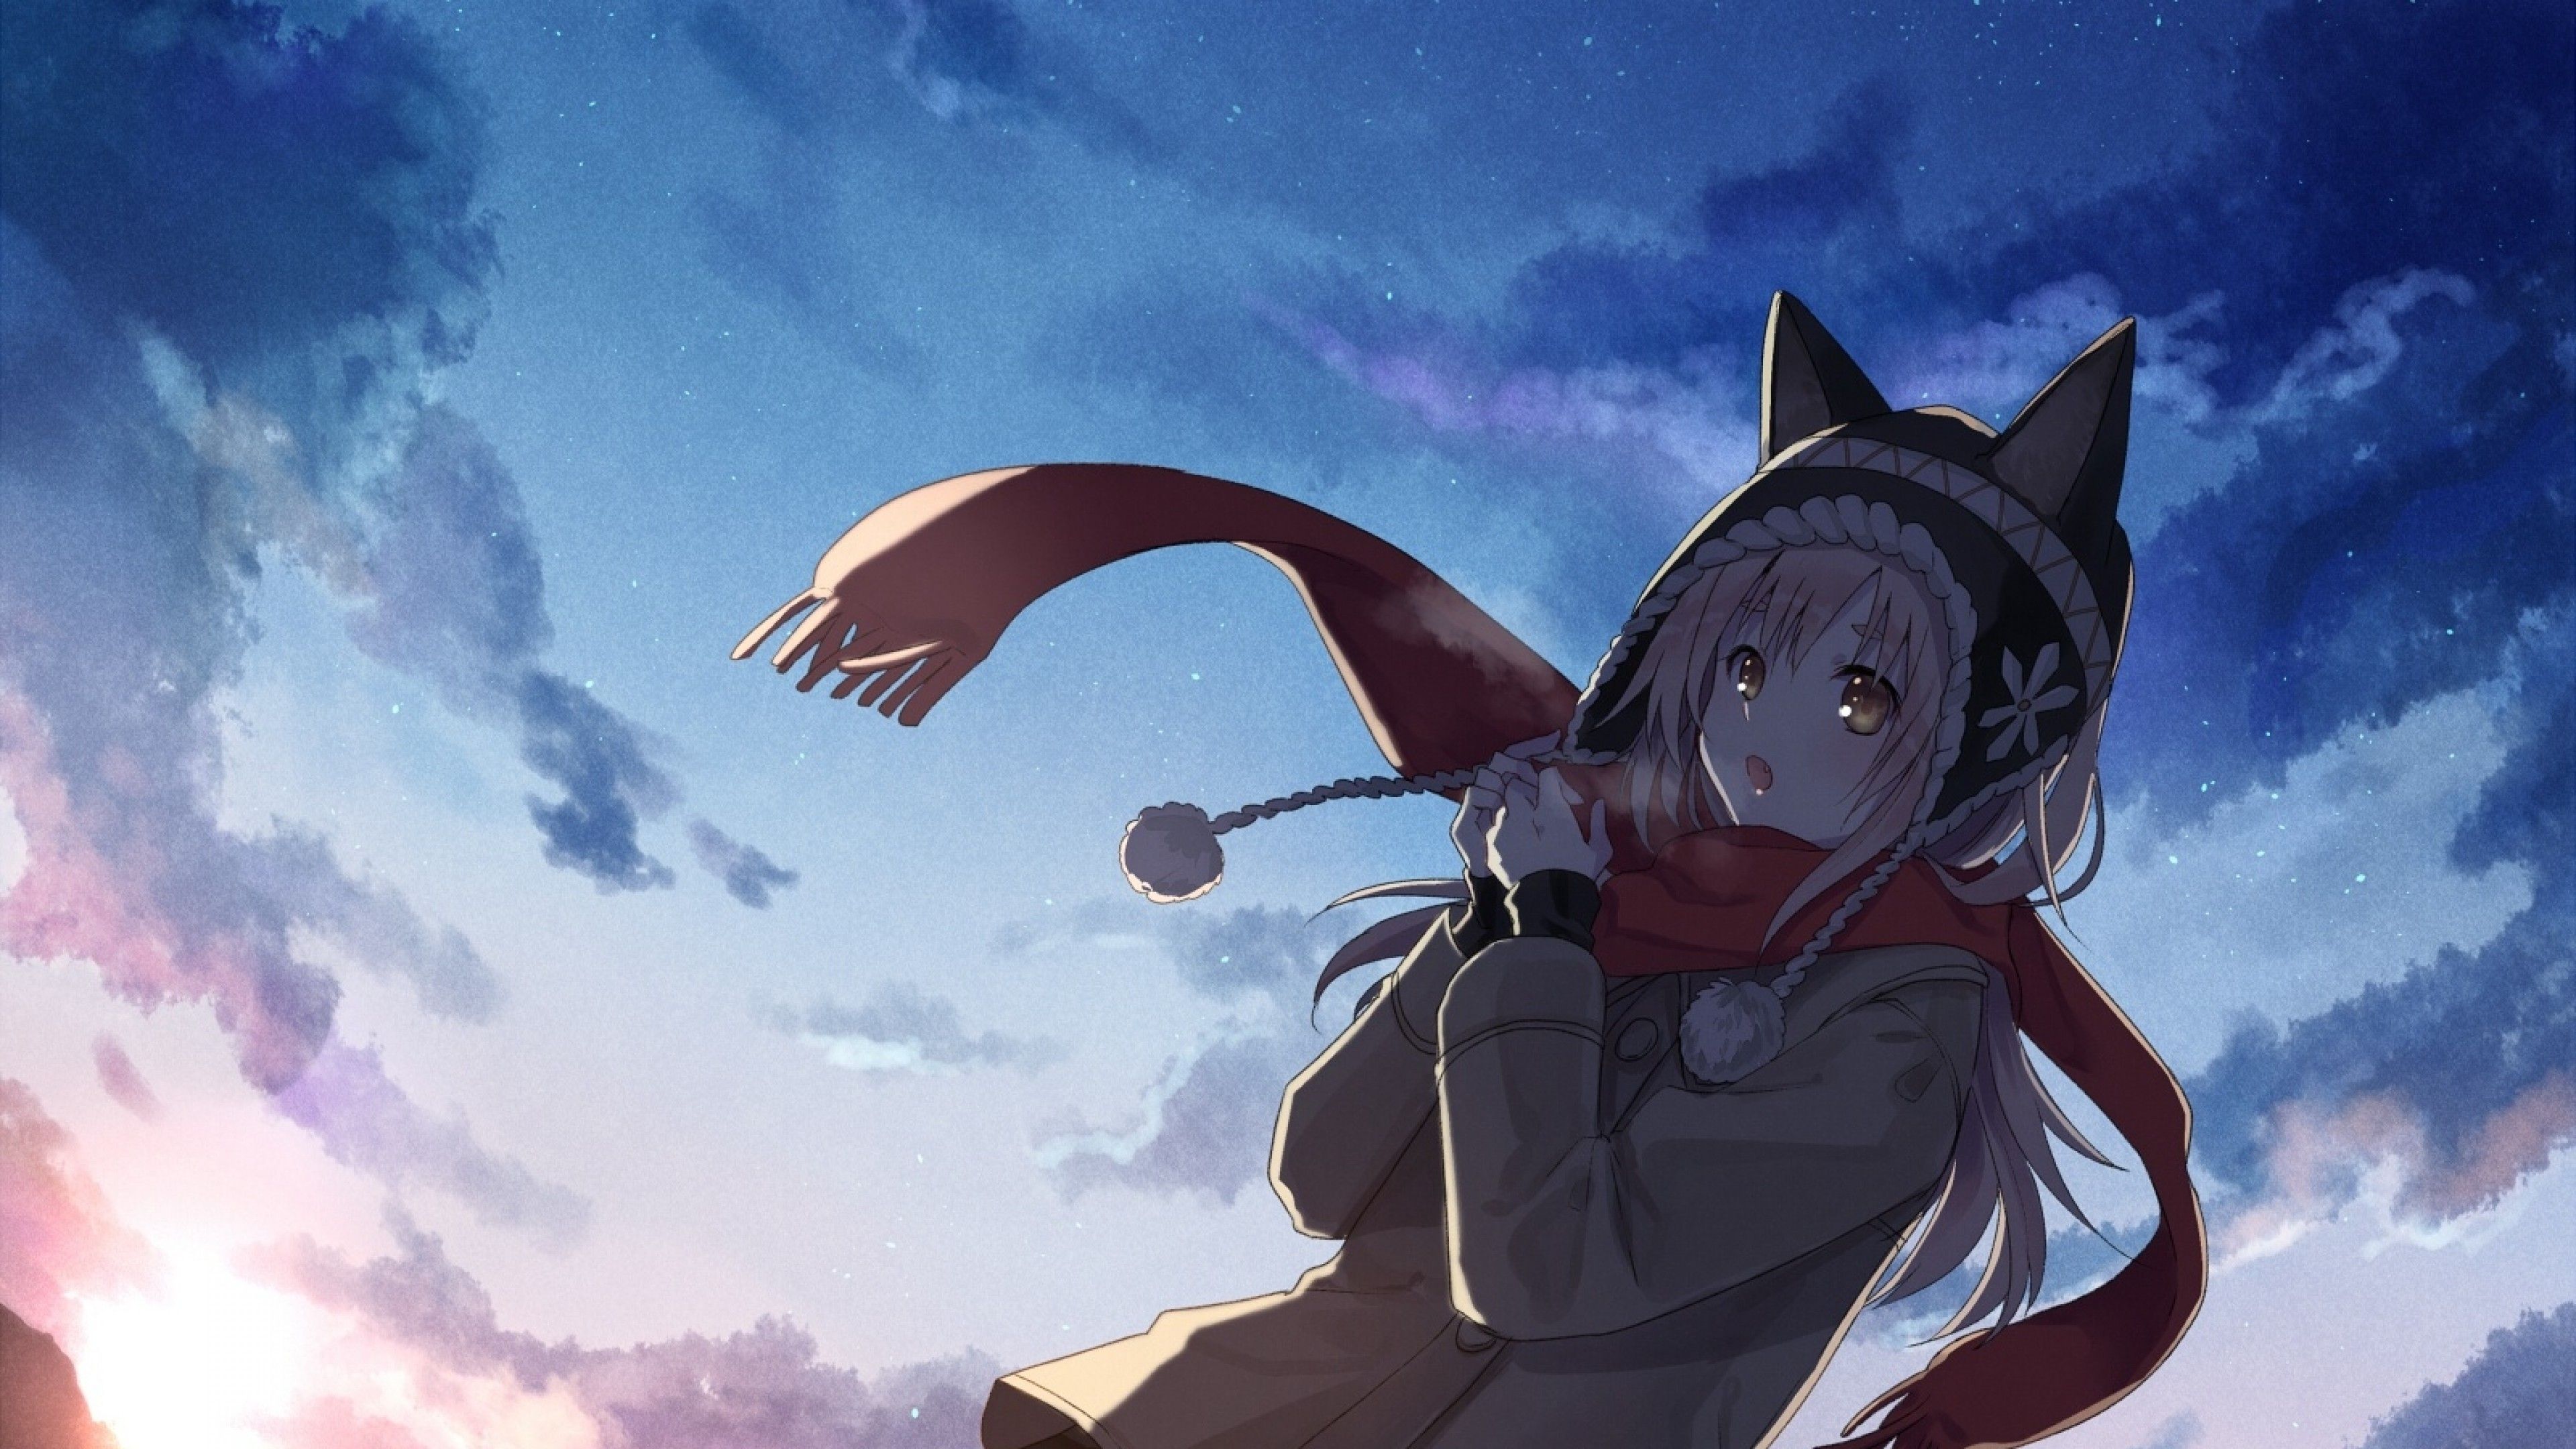 Download 3840x2160 Red Scarf, Anime Girl, Sunset, Sky, Scenic, Cute, Clouds Wallpaper for UHD TV